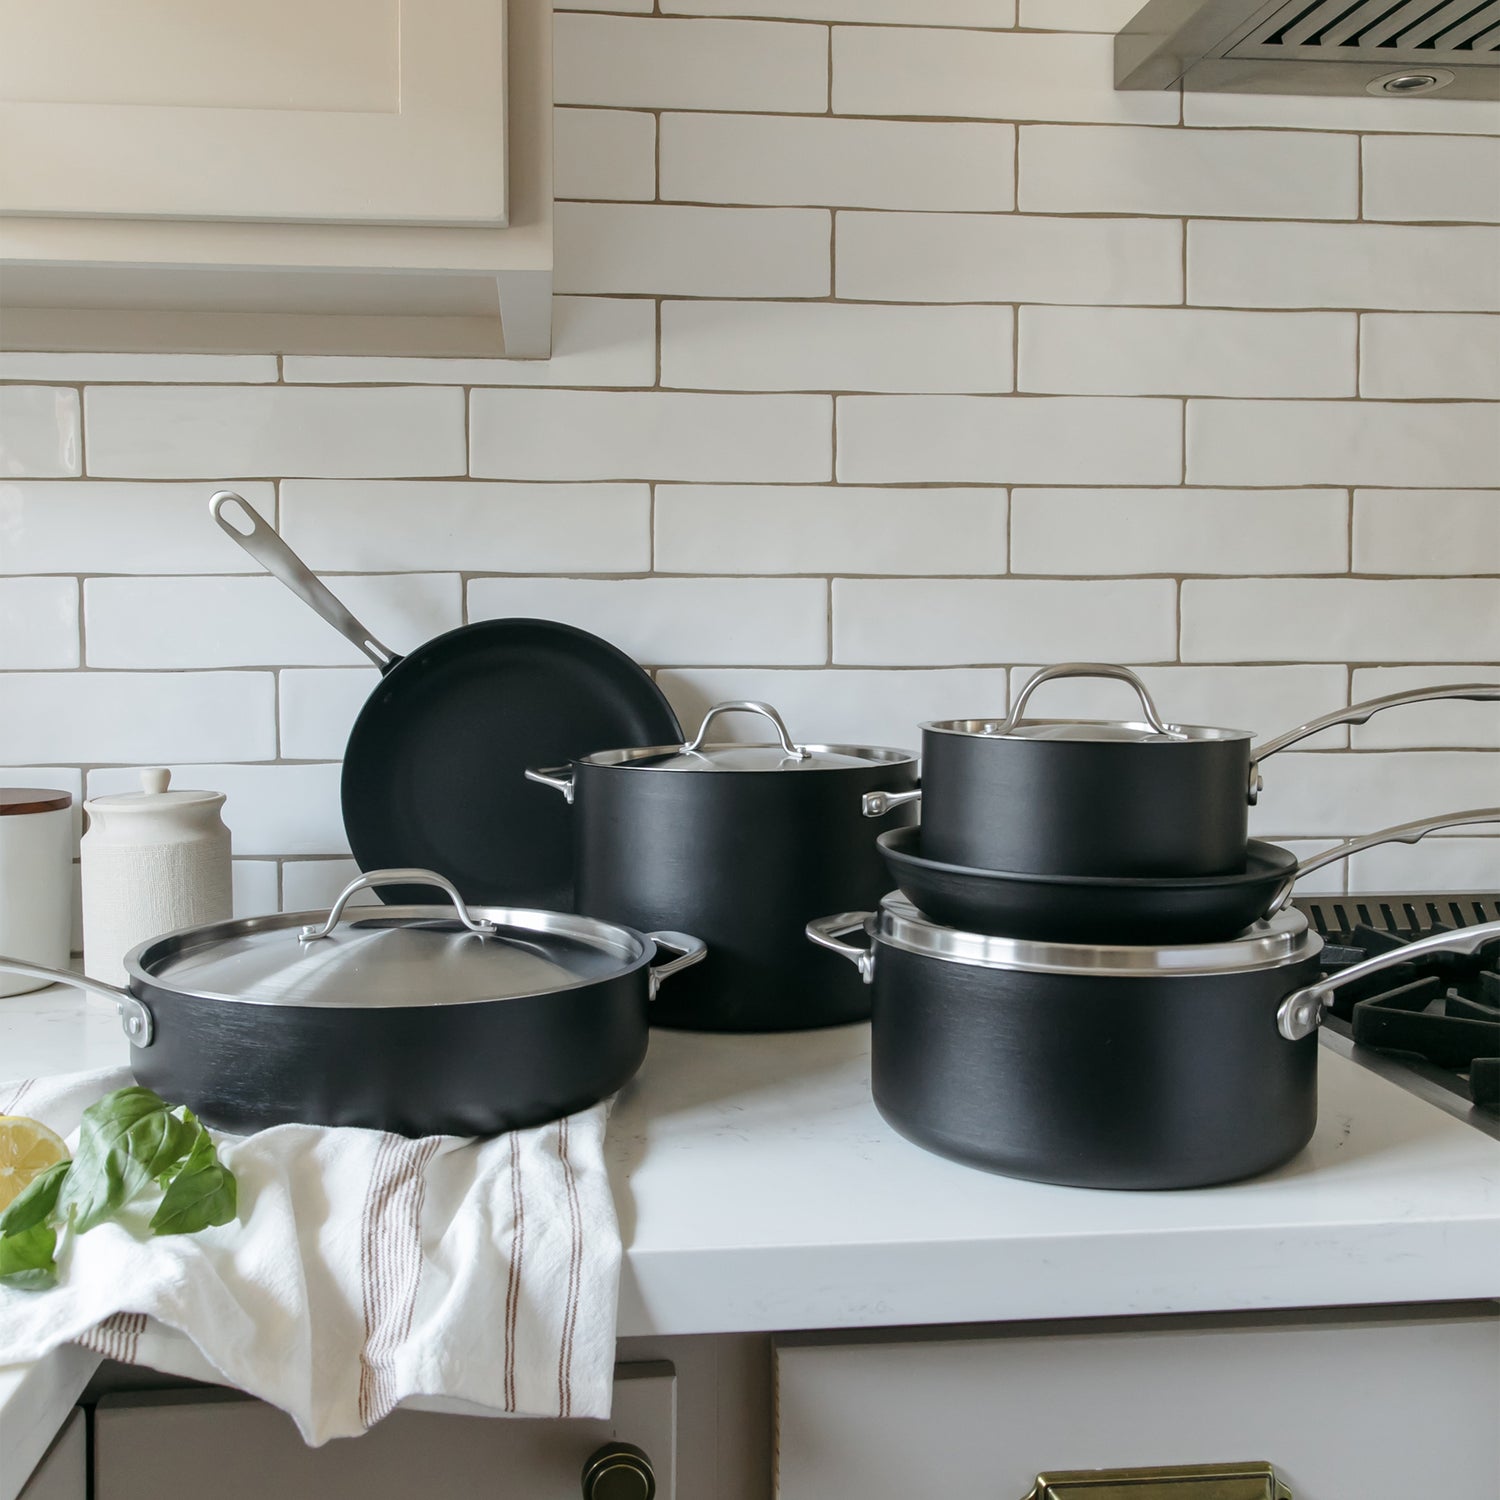 Buy a 10-Piece Nonstick Induction Cookware Set Built for a